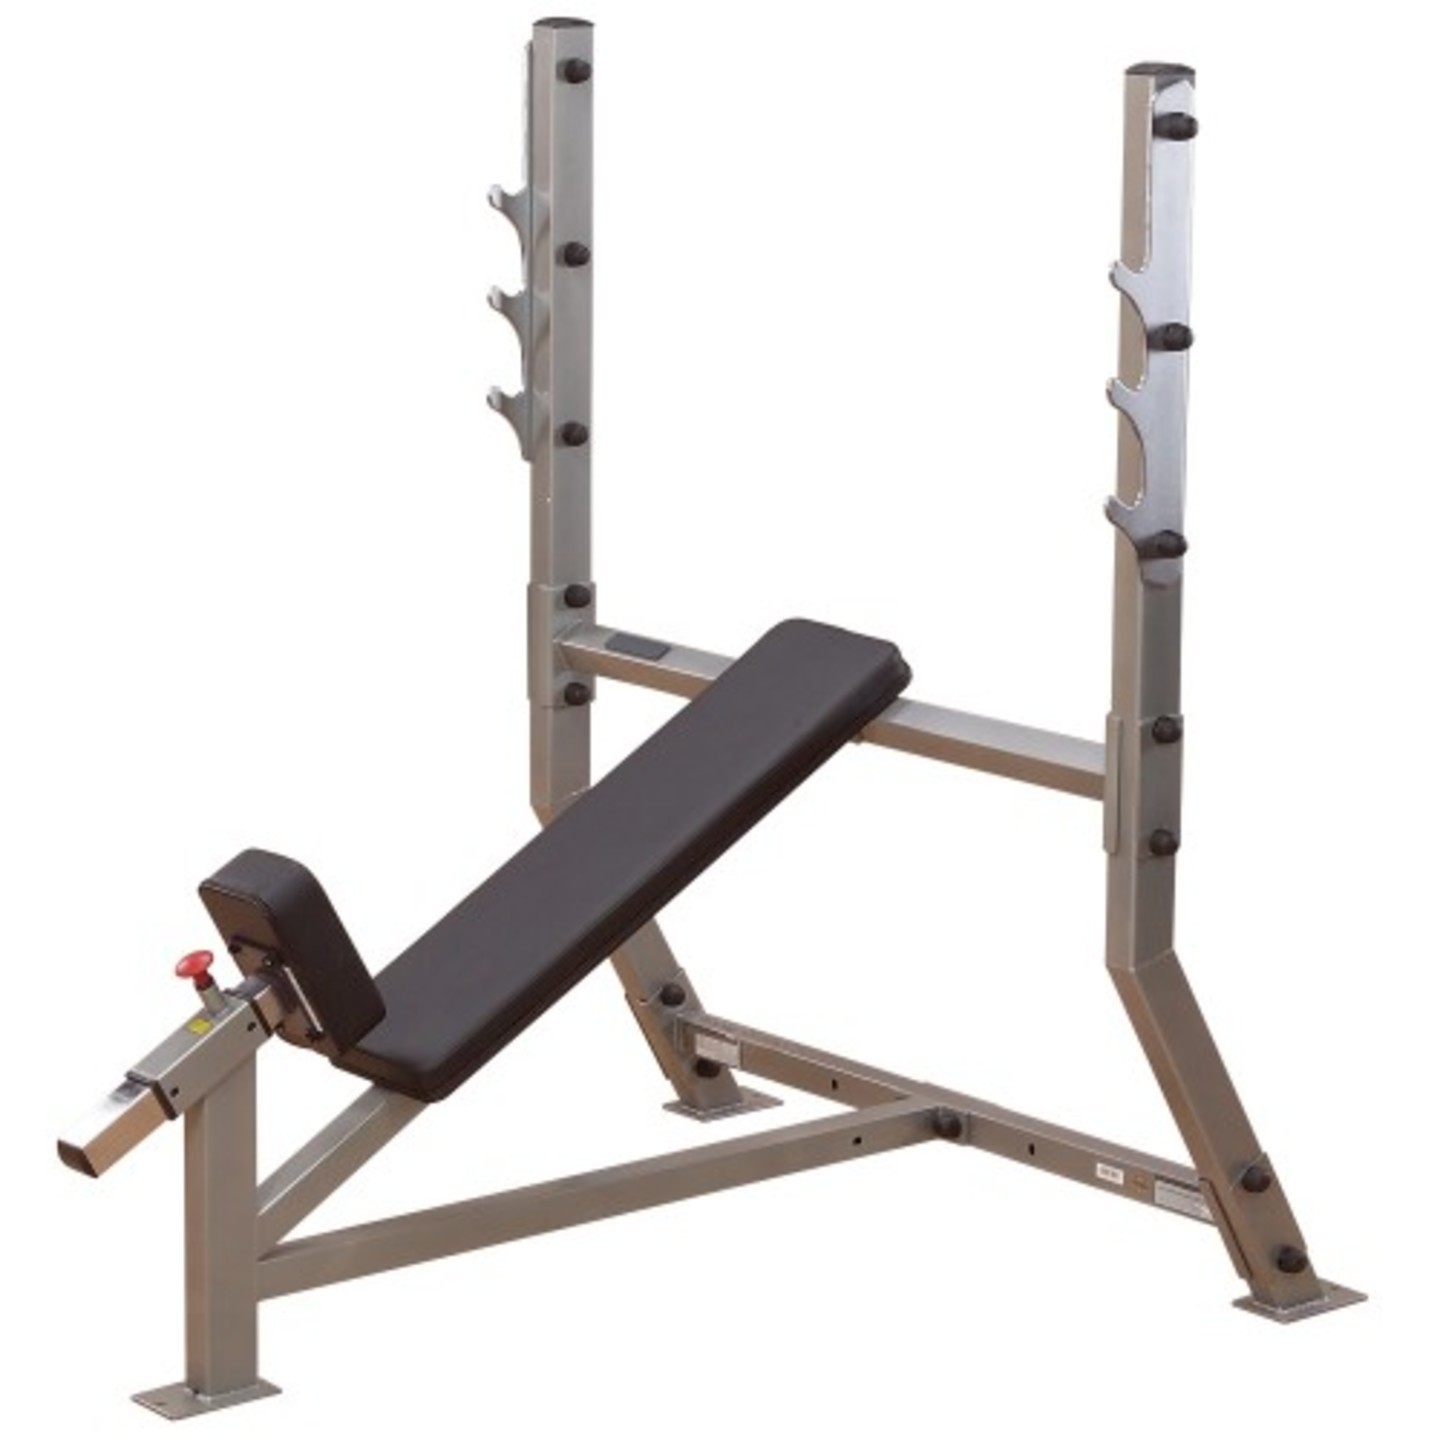 Body-Solid Full Commercial Olympic Incline Bench SIB359G